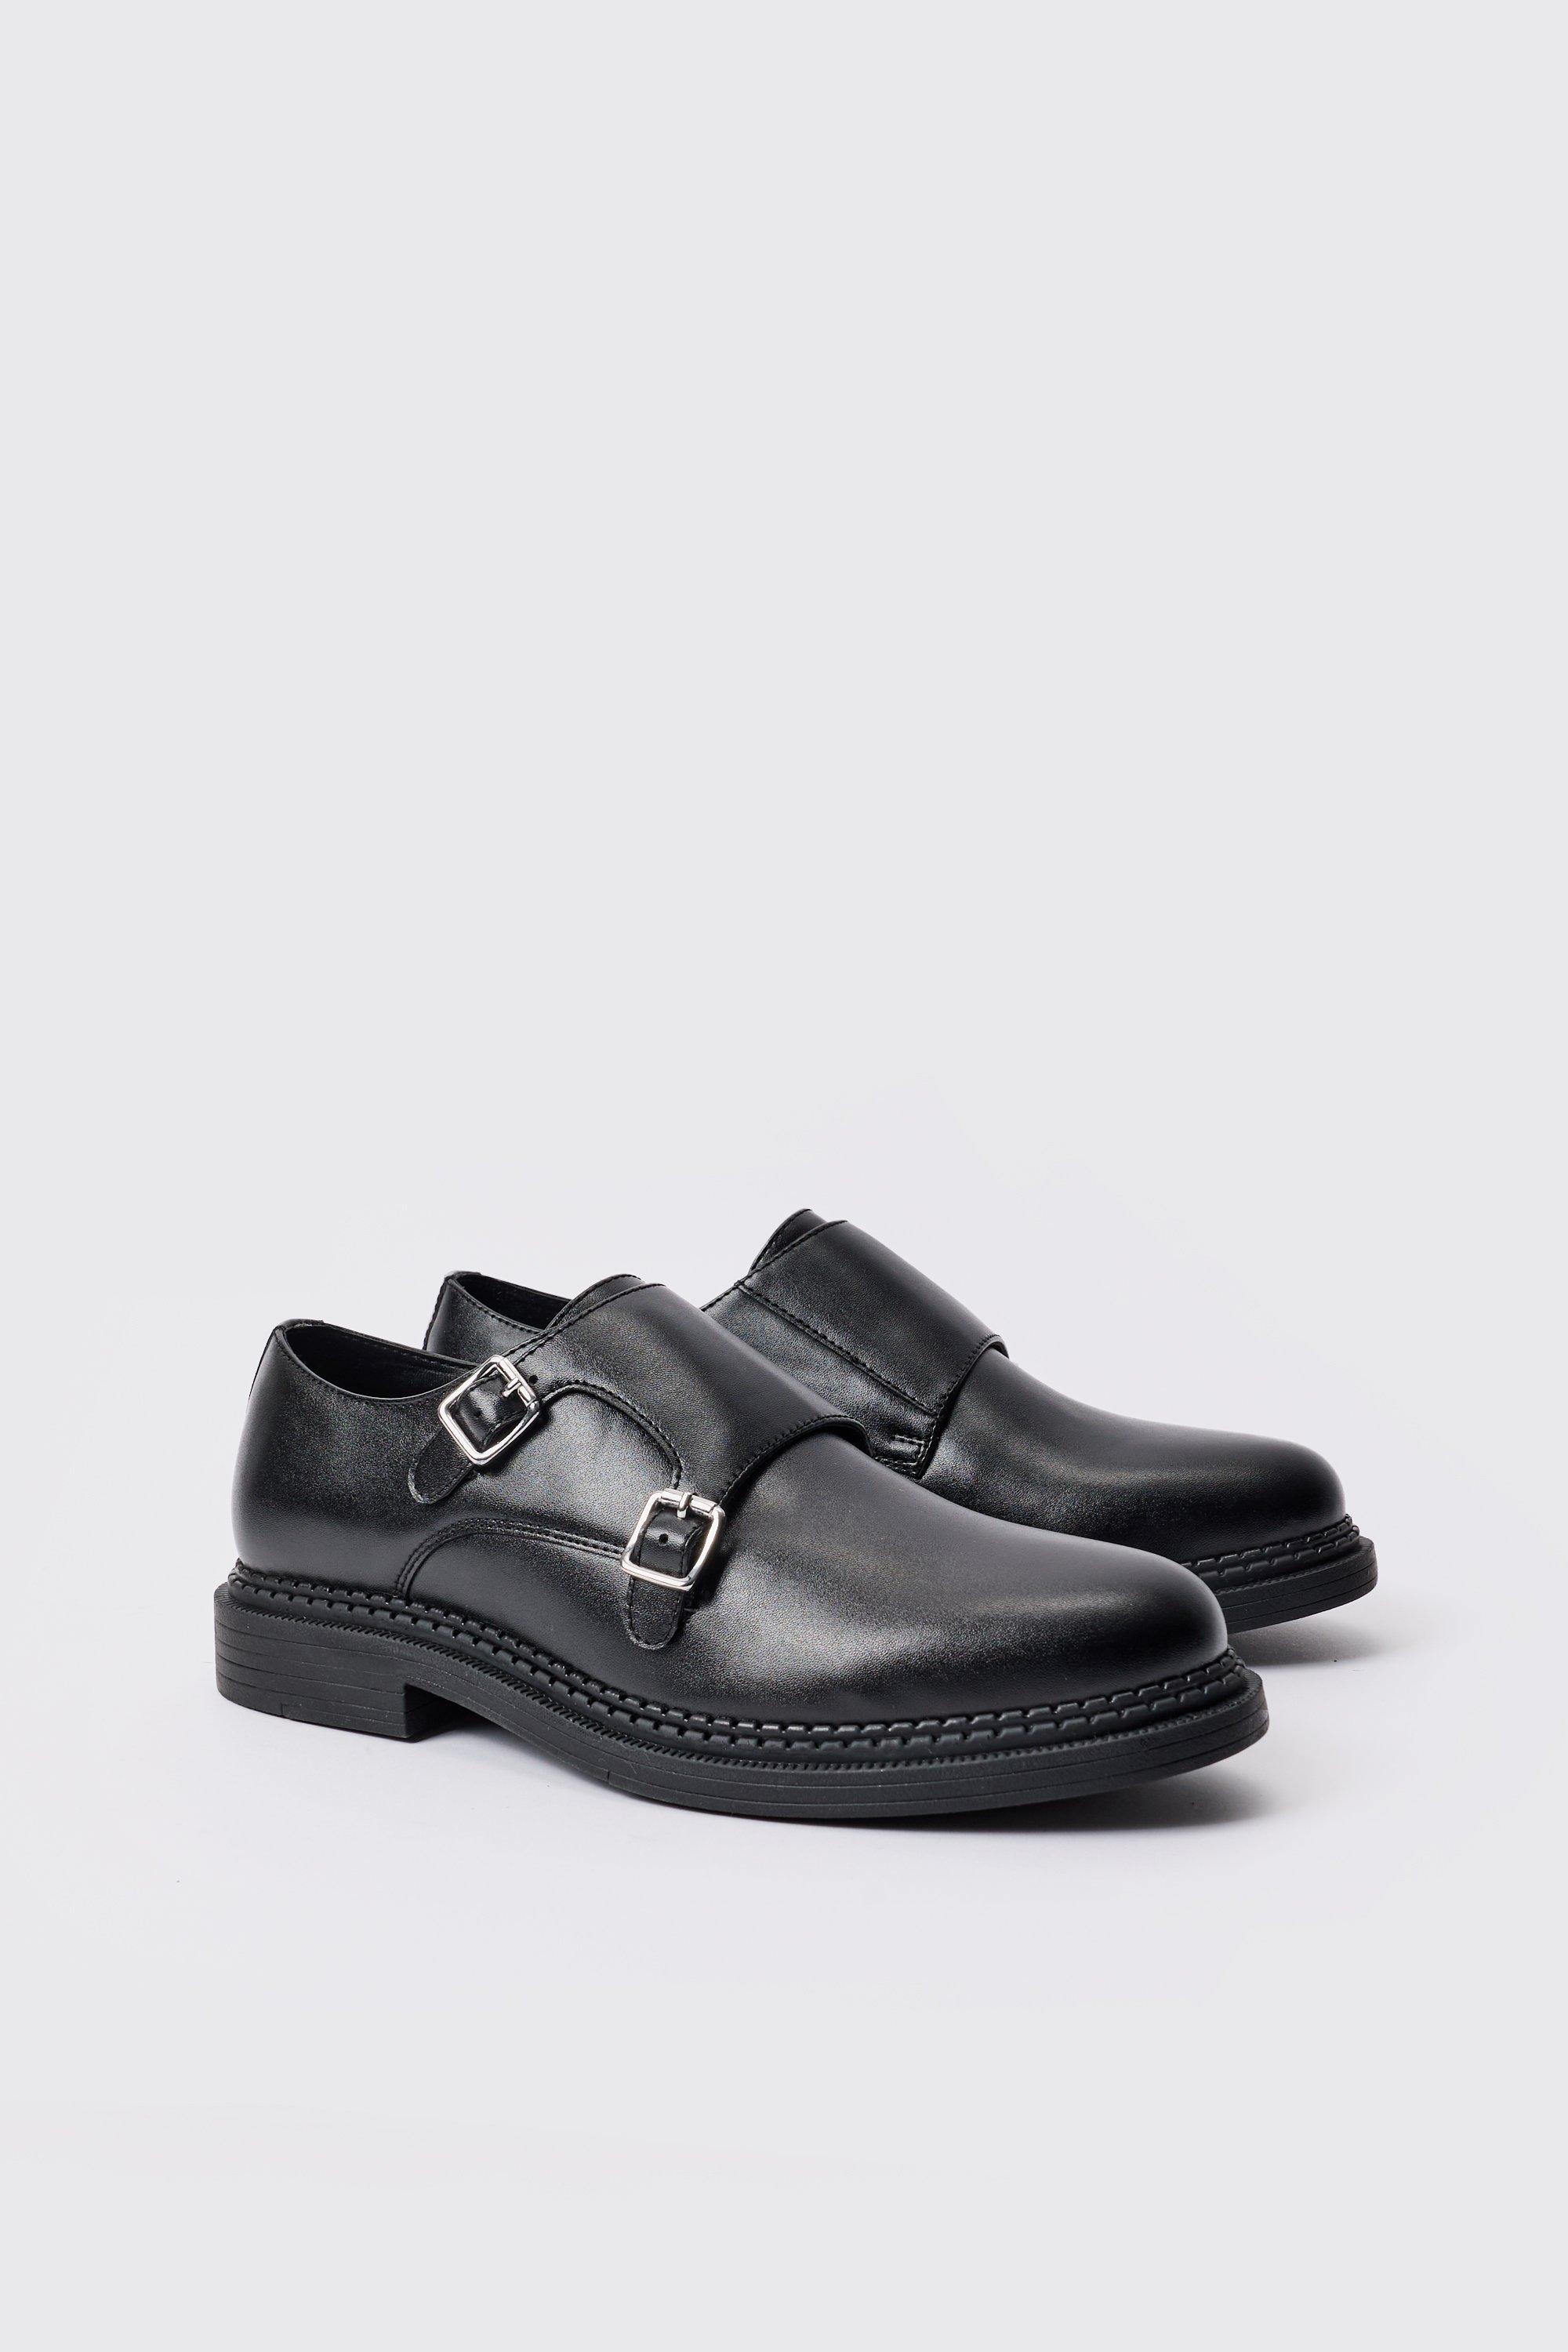 Image of Pu Monk Strap Loafer In Black, Nero